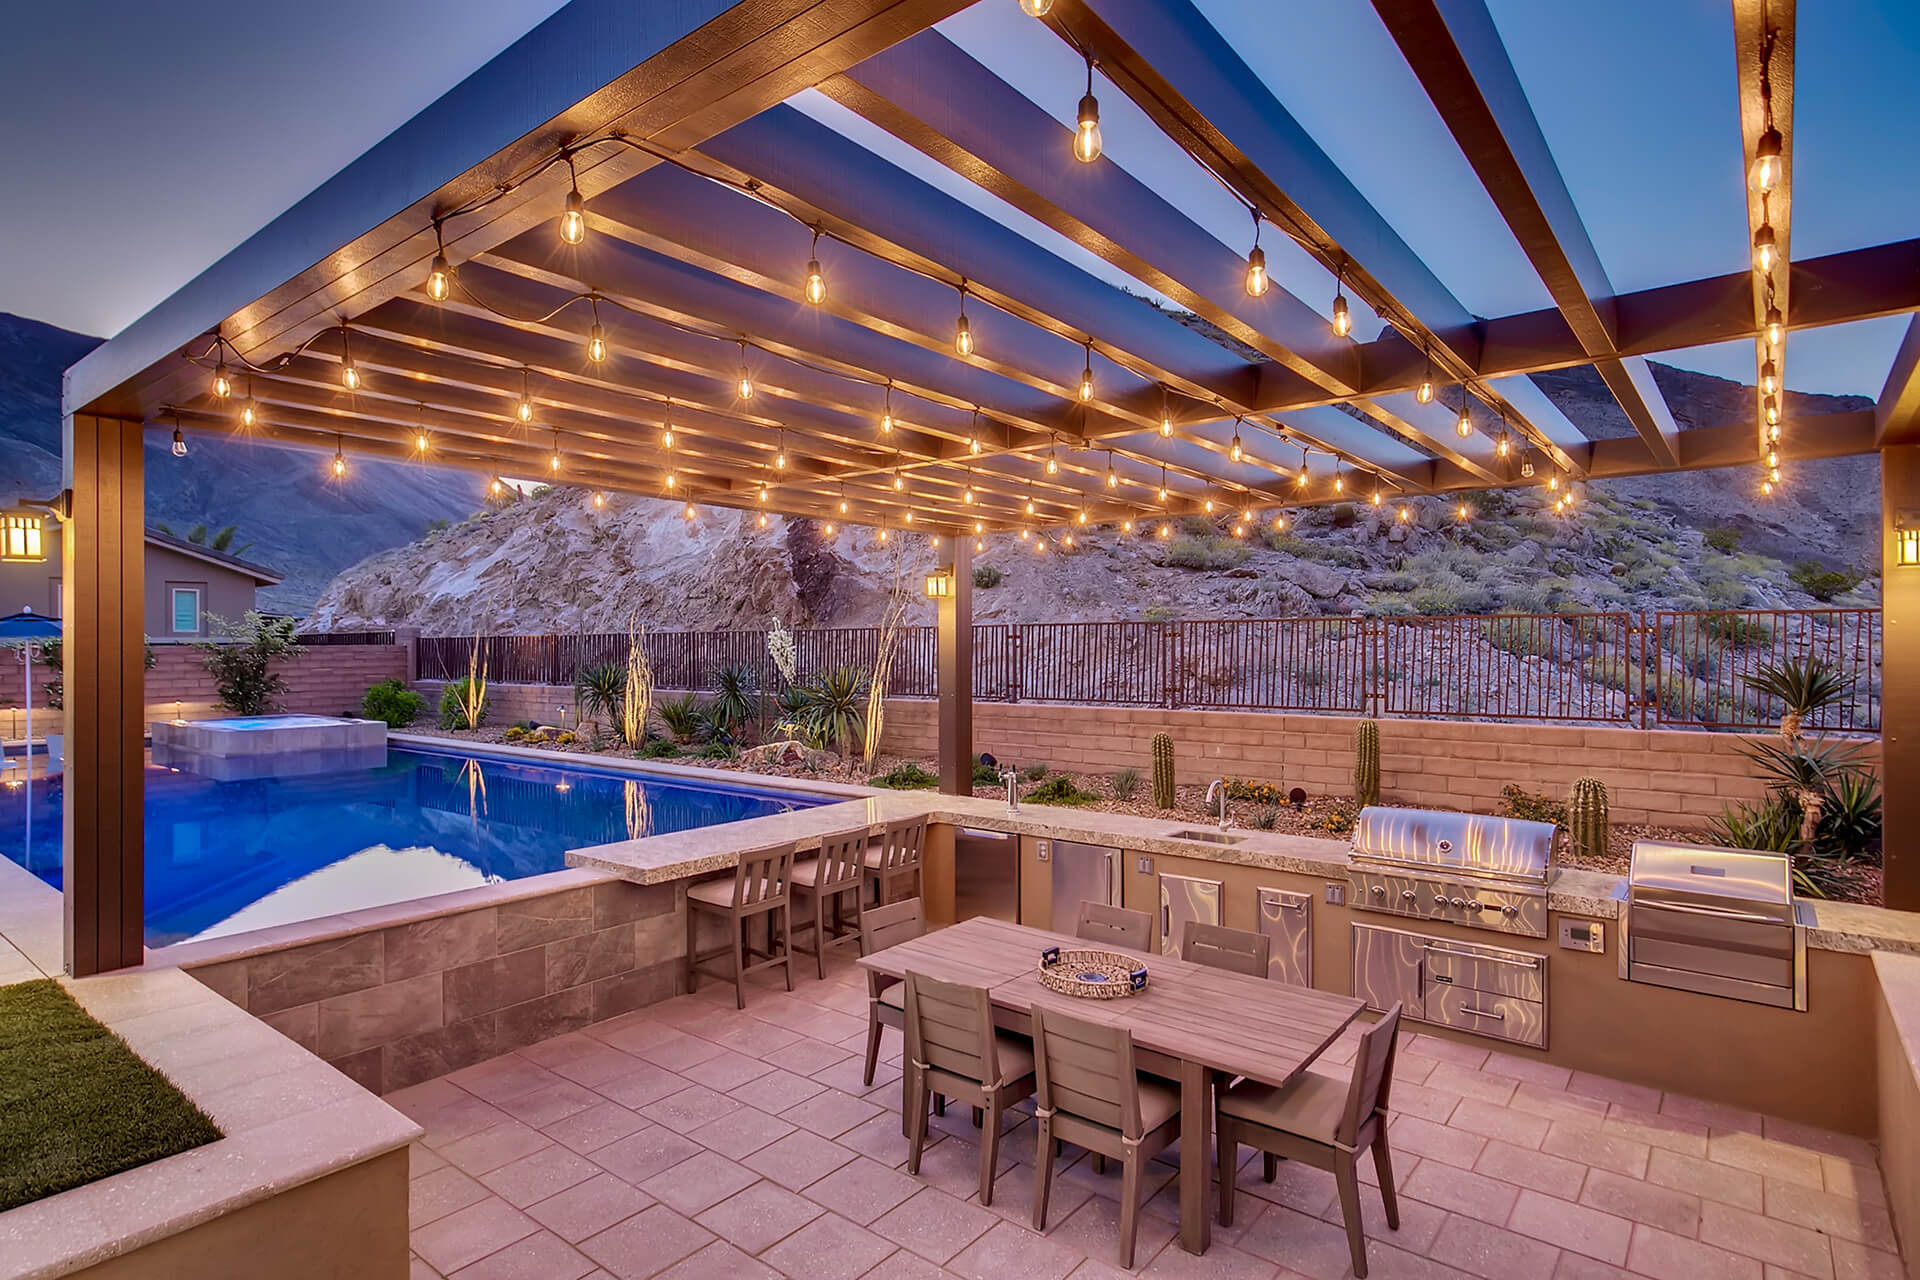 Custom Outdoor Kitchen and Living Area Design and Construction by Custom Outdoor Living of Las Vegas, Nevada